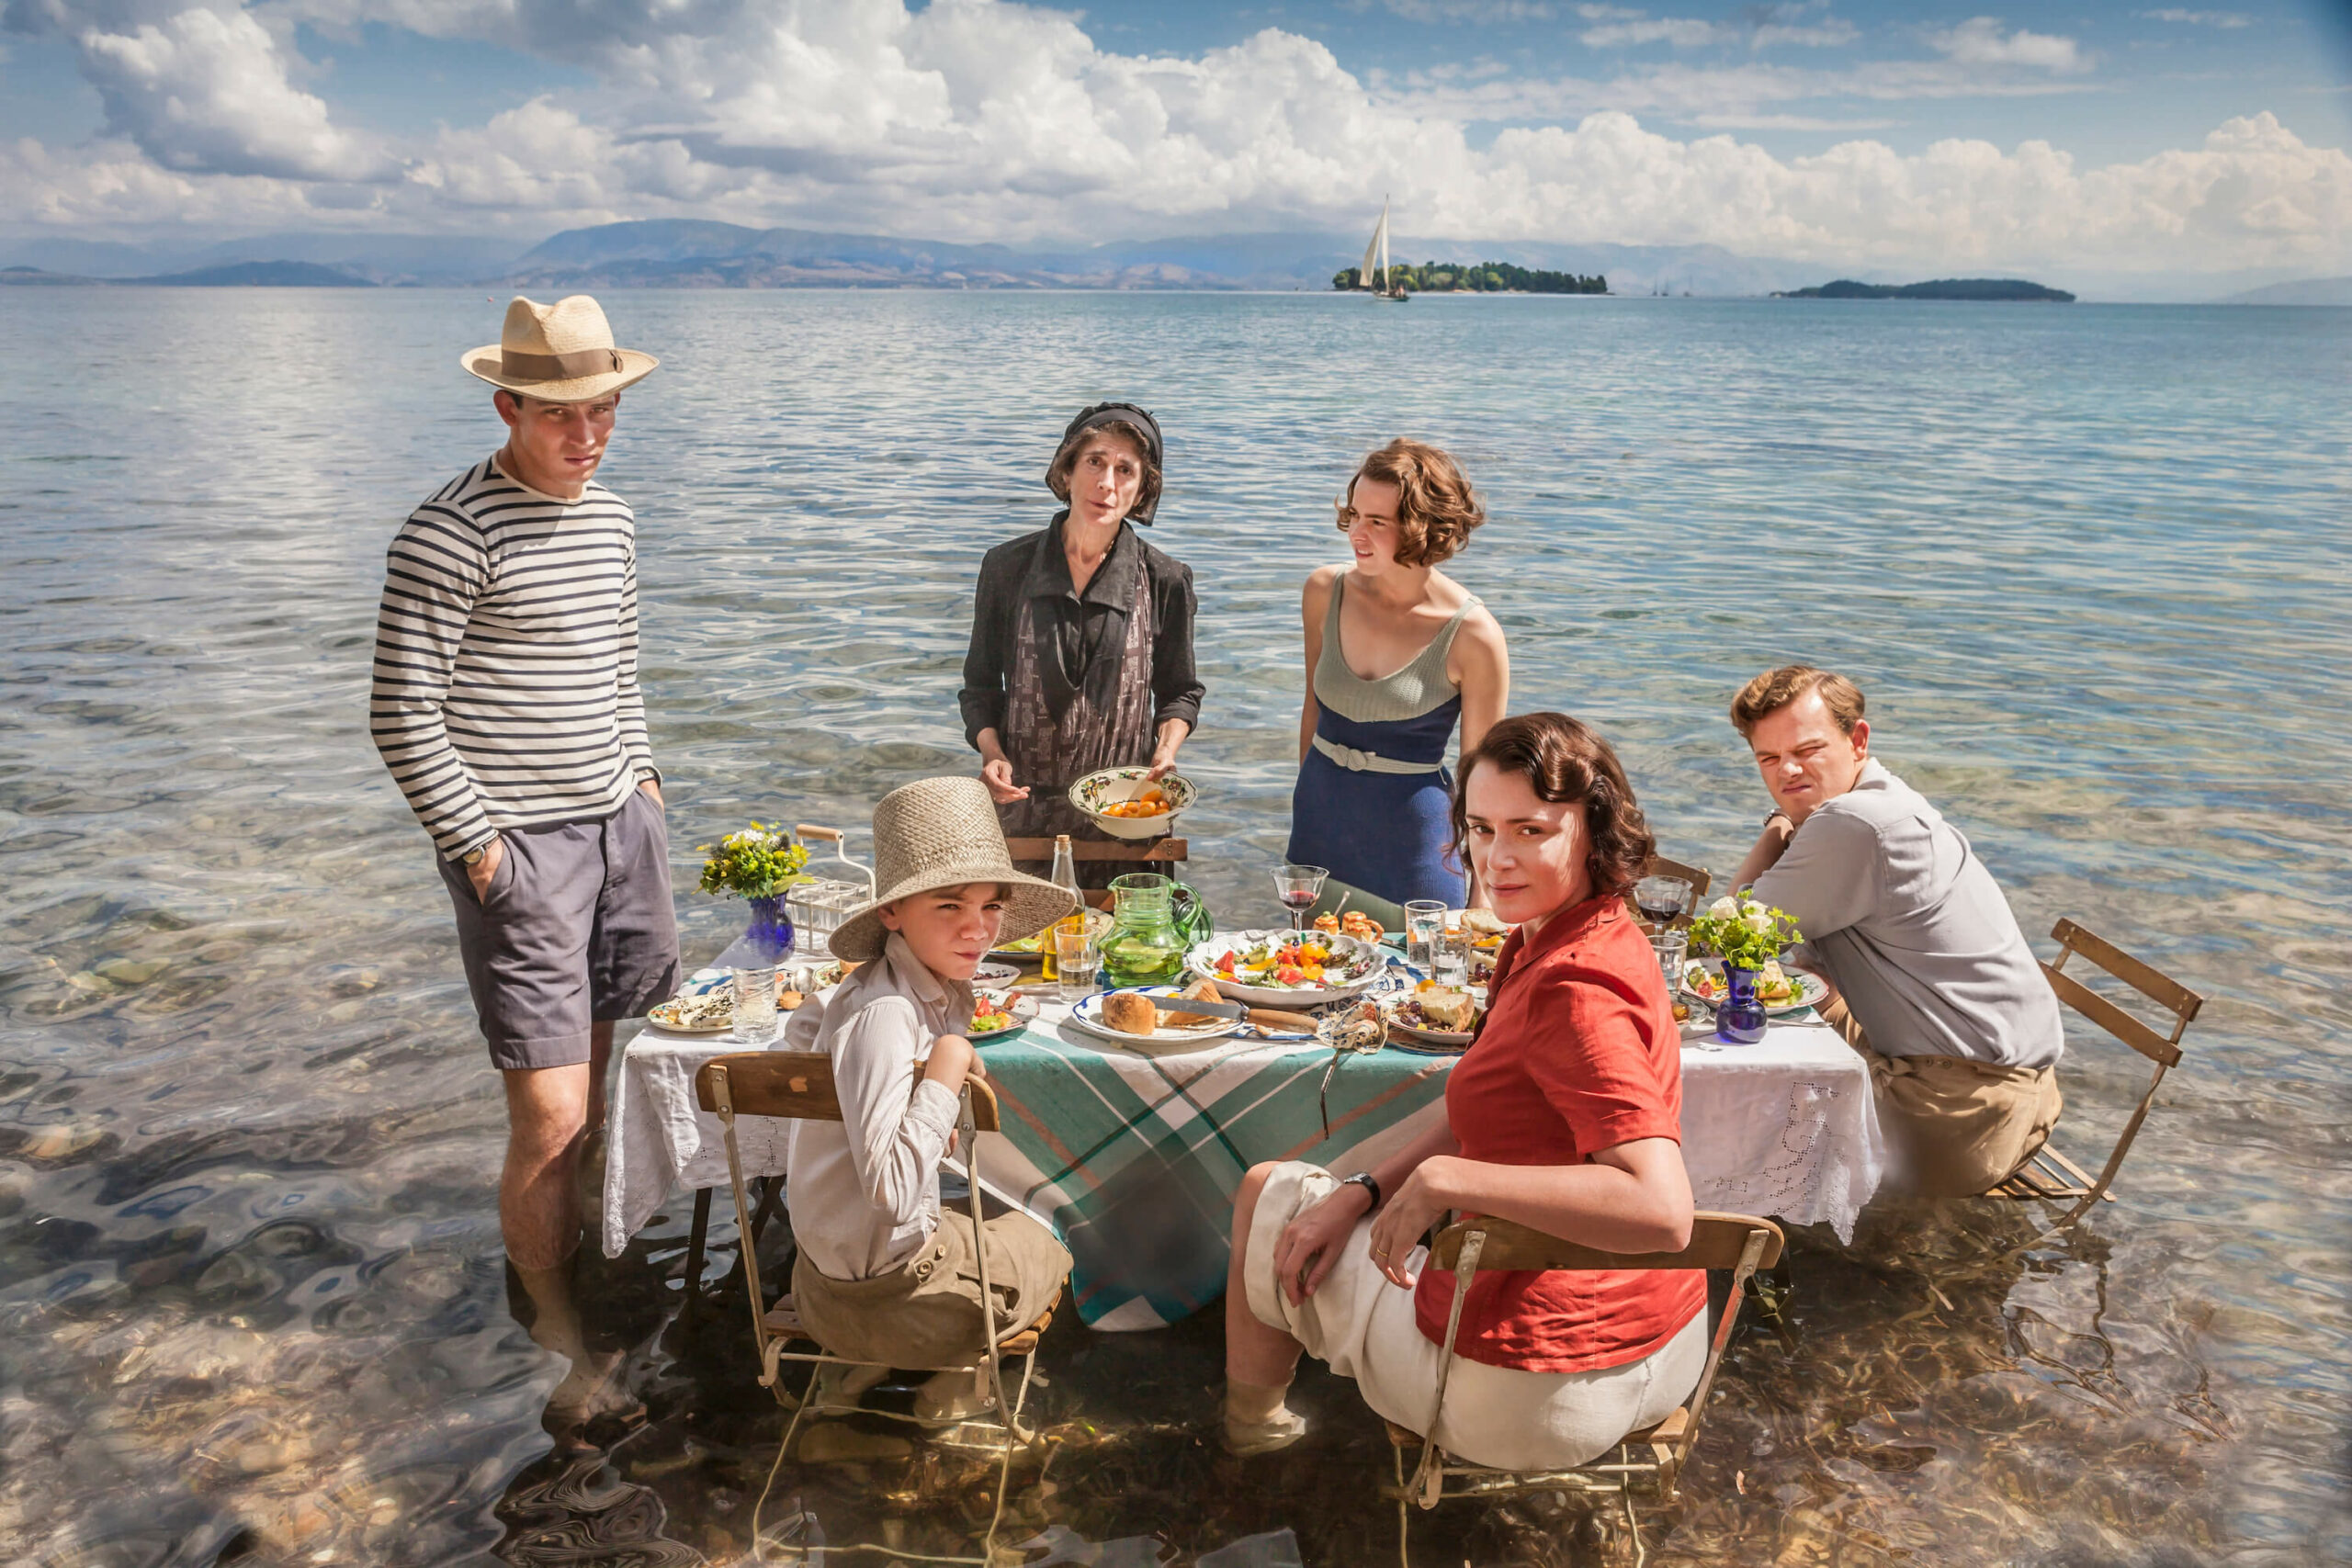 How true is the Durrells?